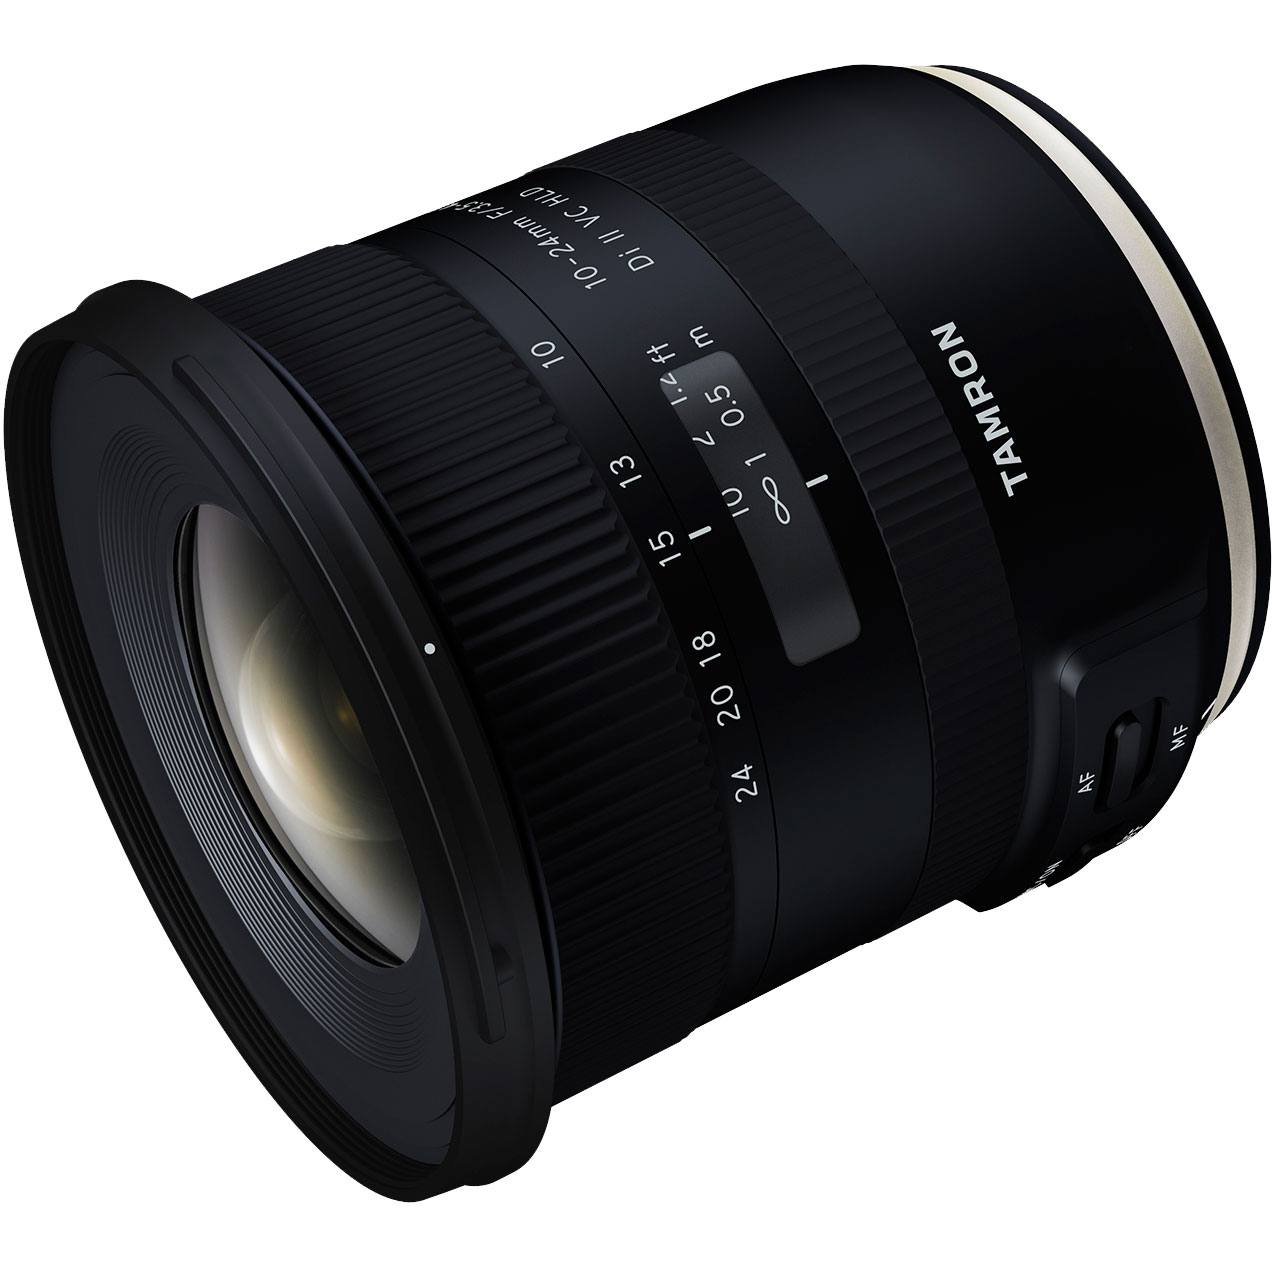 TAMRON 10-24MM F/3.5-4.5 DI II VC HLD FOR CANON EF-S - image 1 of 9